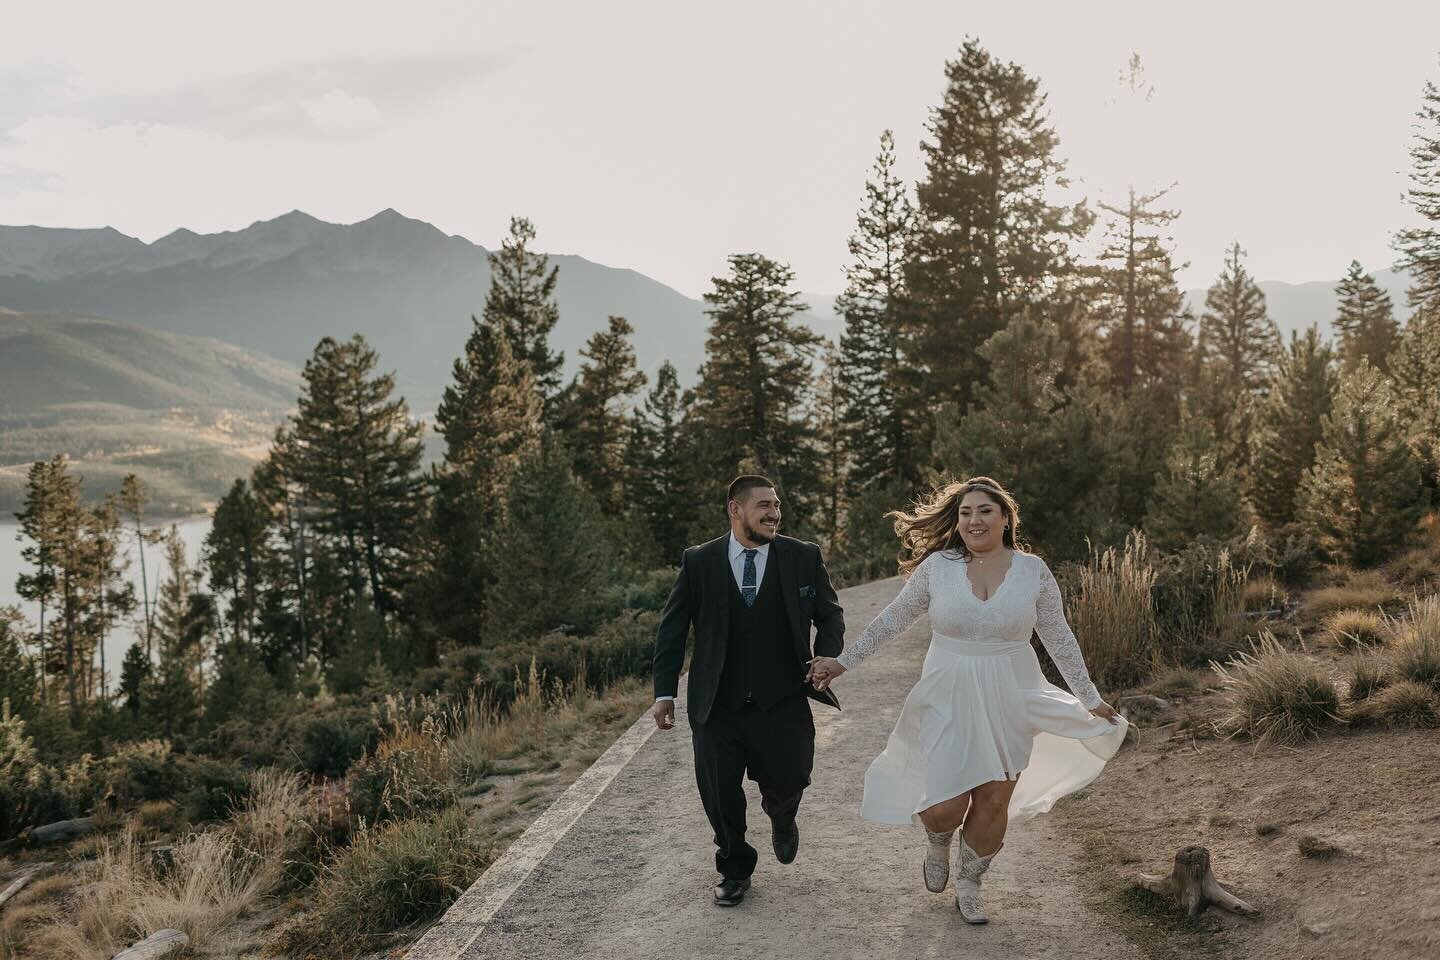 One of my favorite elopements from last year in Breckenridge. When I tell you the vibes were immaculate I really mean it. These two rented a beautiful airbnb in Breckenridge where they had a first look and privately said vows to one another. After th